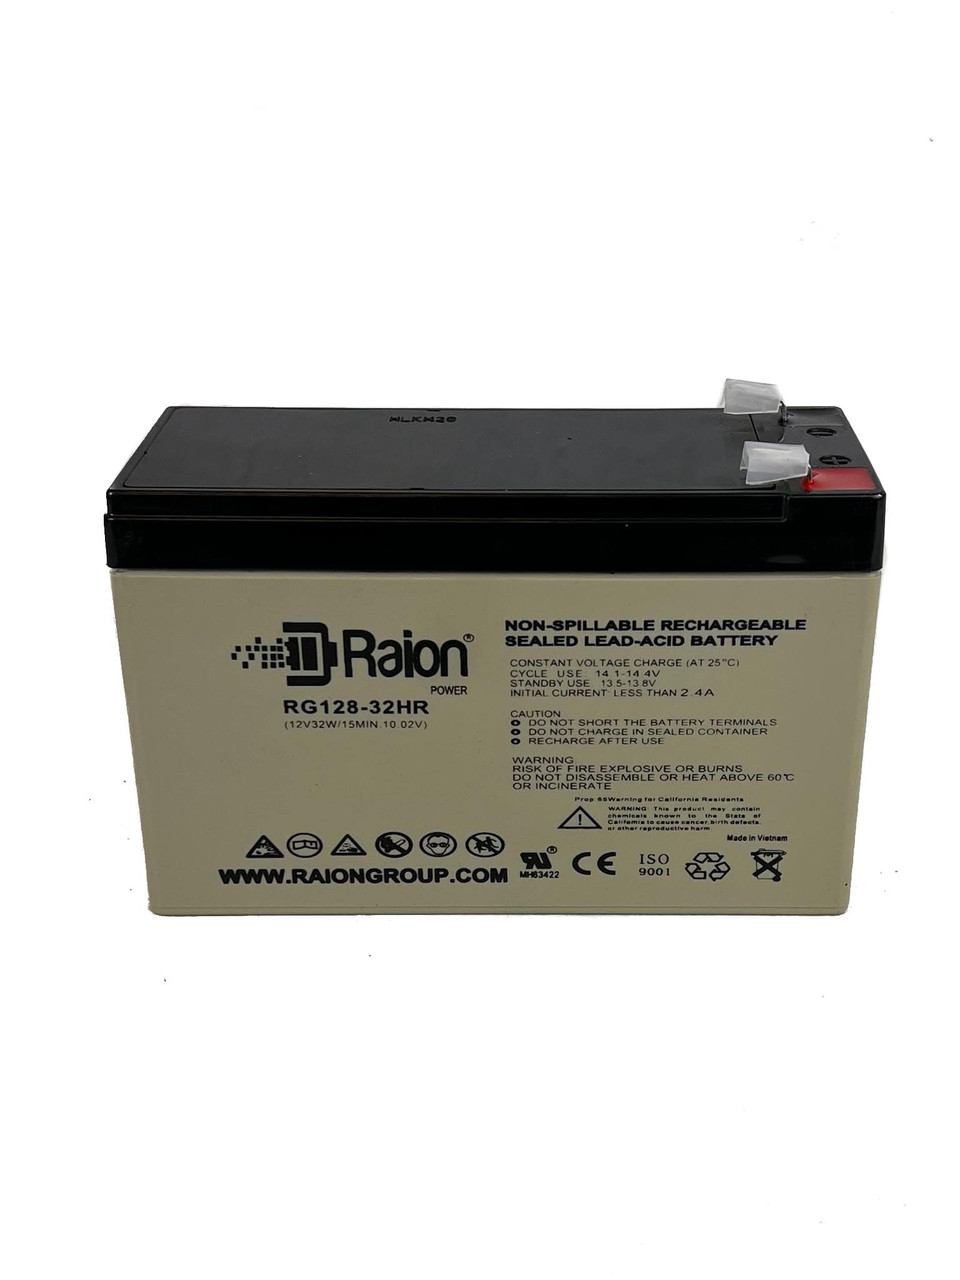 Raion Power RG128-32HR Replacement High Rate Battery Cartridge for Ultra 850 VA 425 WATTS Backup UPS